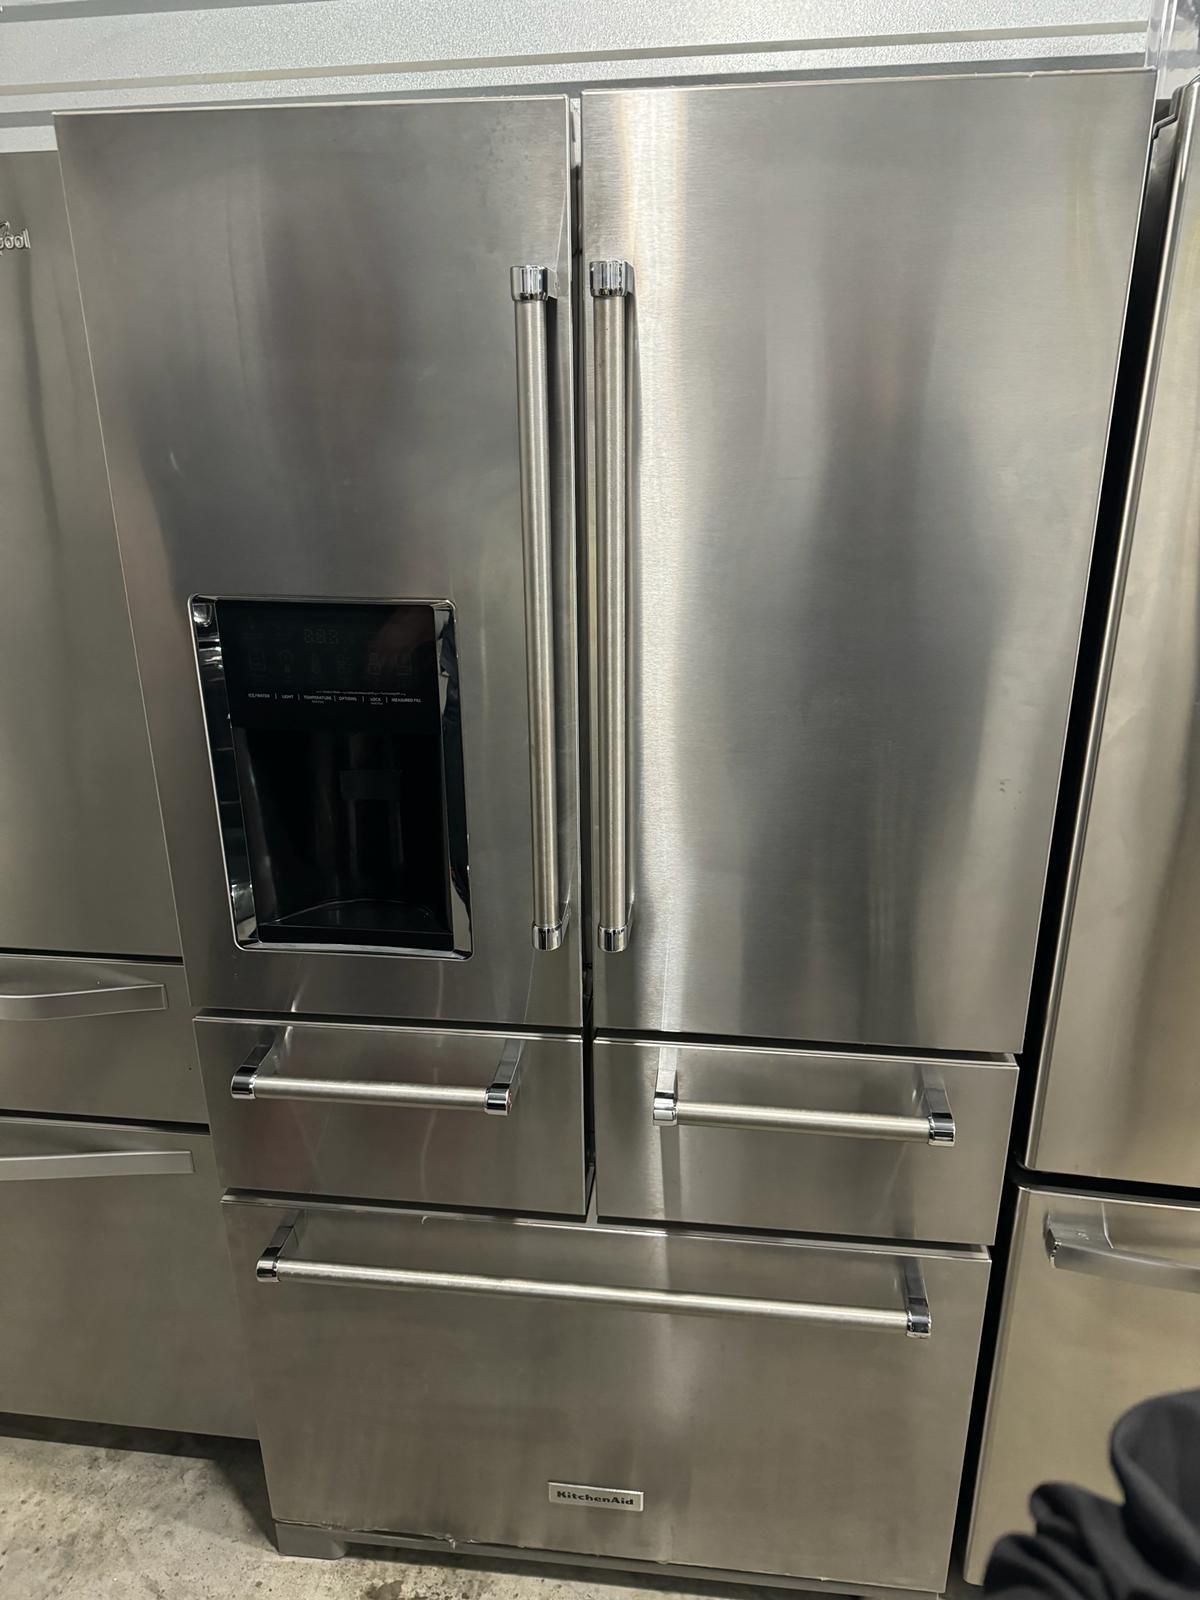 Kitchen aid stanless Steel Refrigerator/ DELIVERY AVAILABLE 